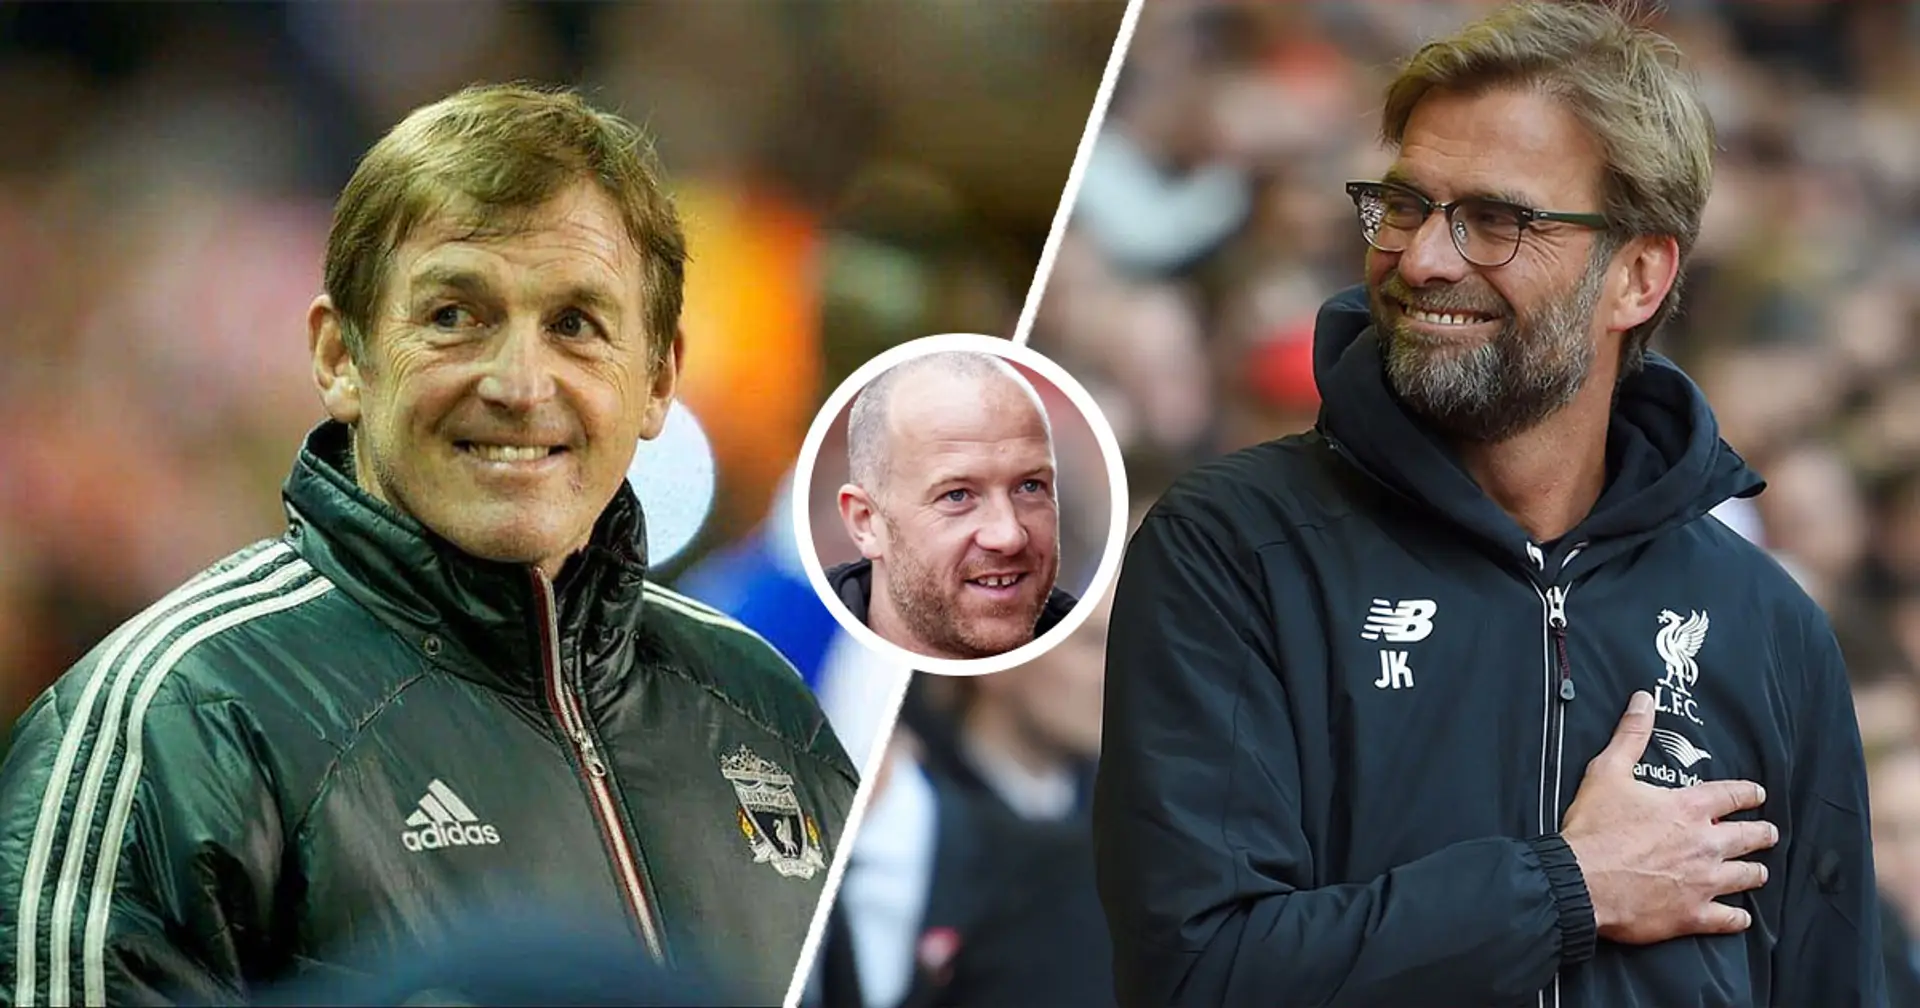 'He seems to have best solutions for Liverpool at the moment': ex-Red Charlie Adam likens Klopp to Dalglish